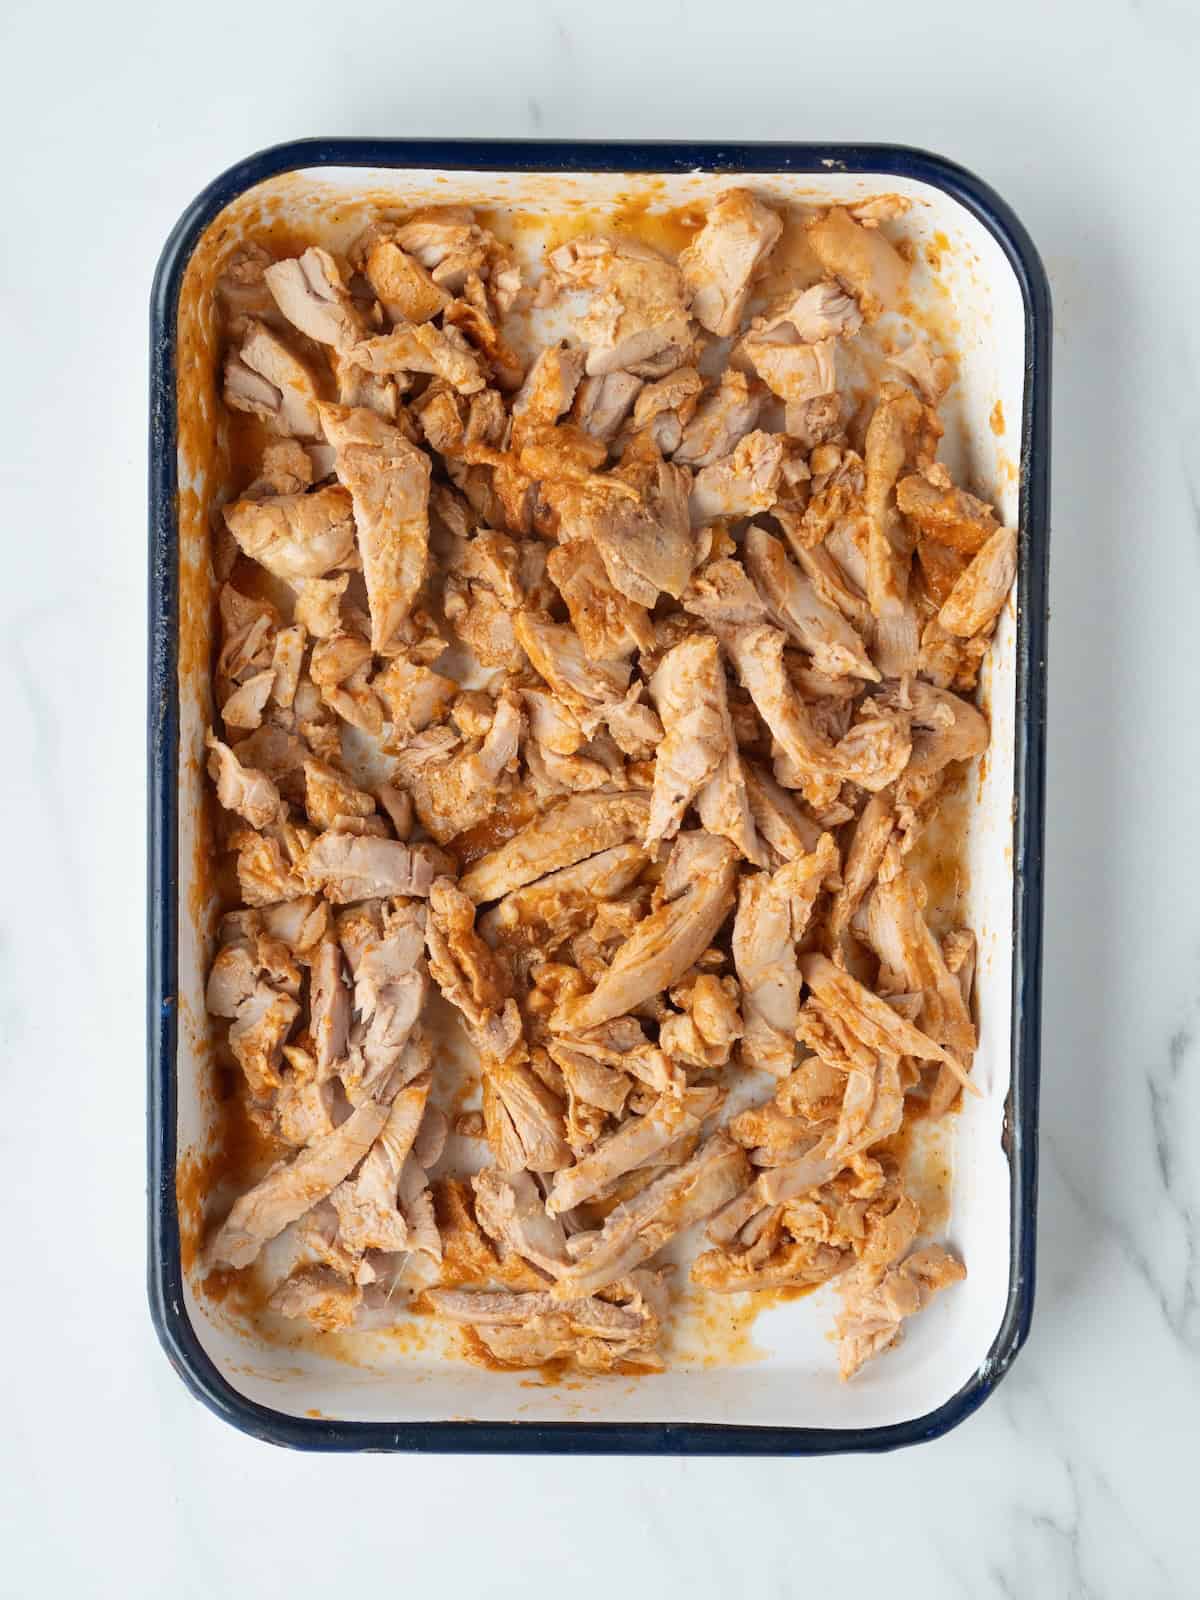 A rectangular dish with cooked chicken thighs cut into strips.